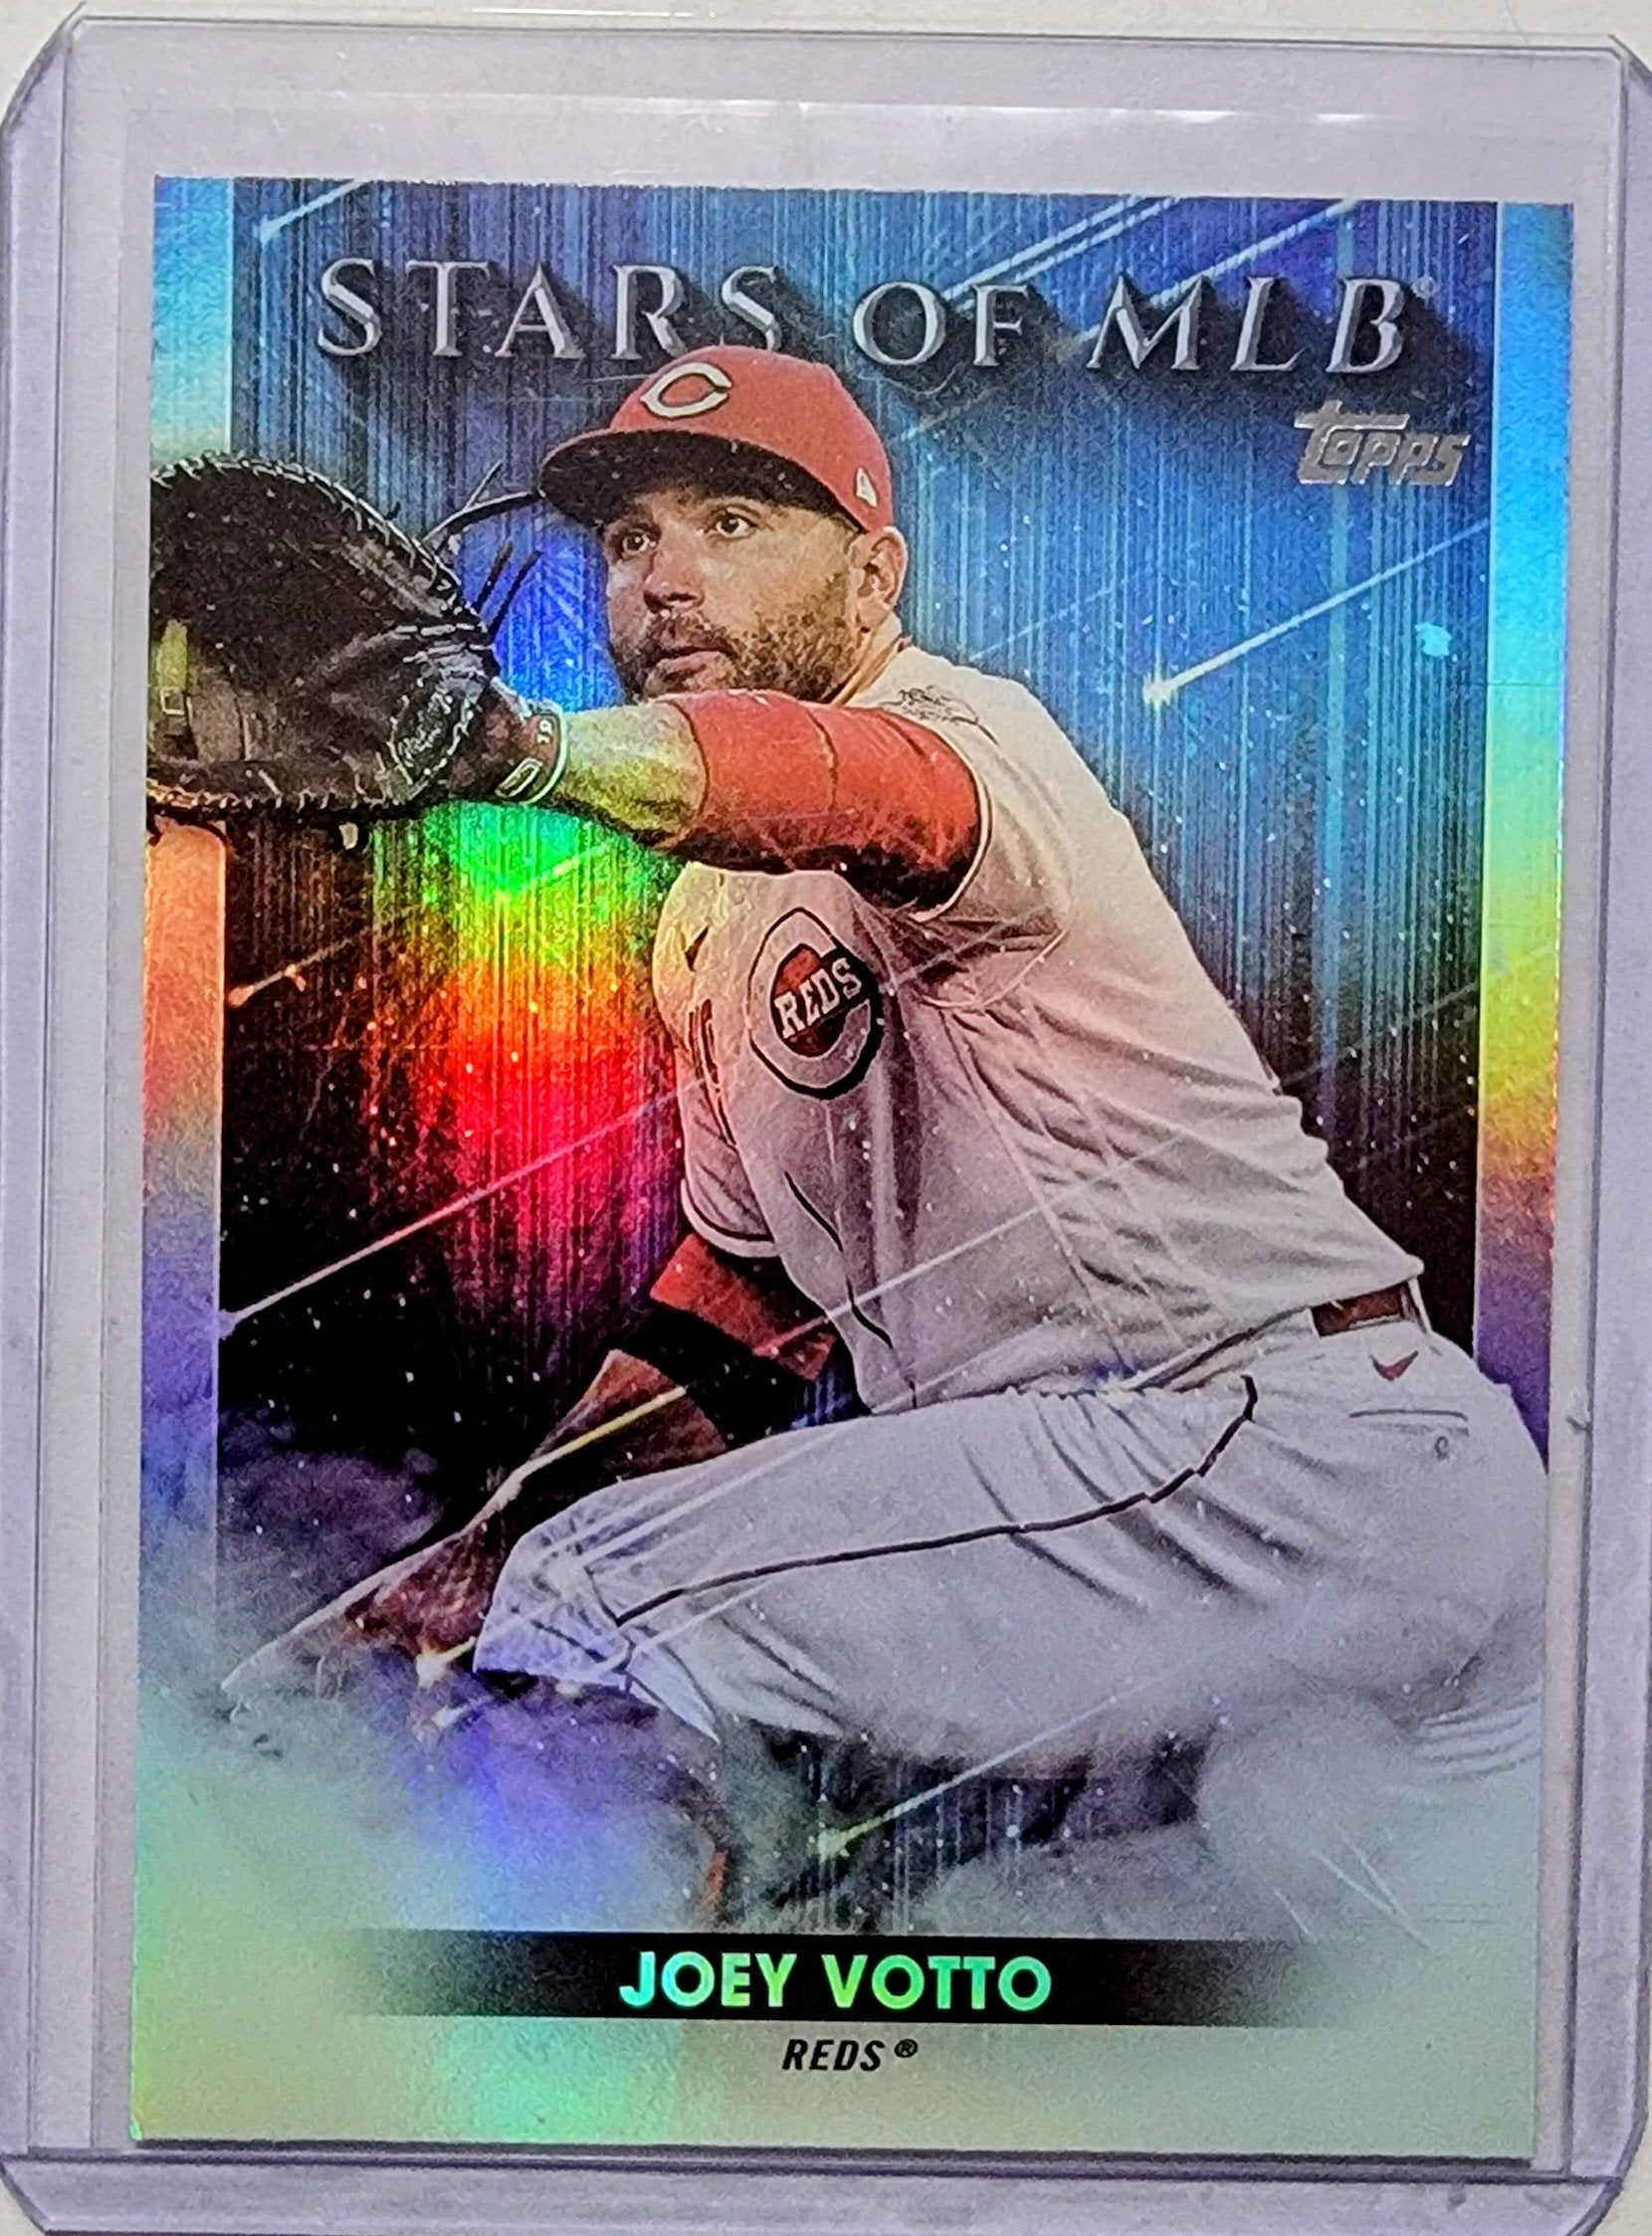 2022 Topps Series 2 Joey Votto Stars of the MLB Insert Baseball Card AVM1 simple Xclusive Collectibles   